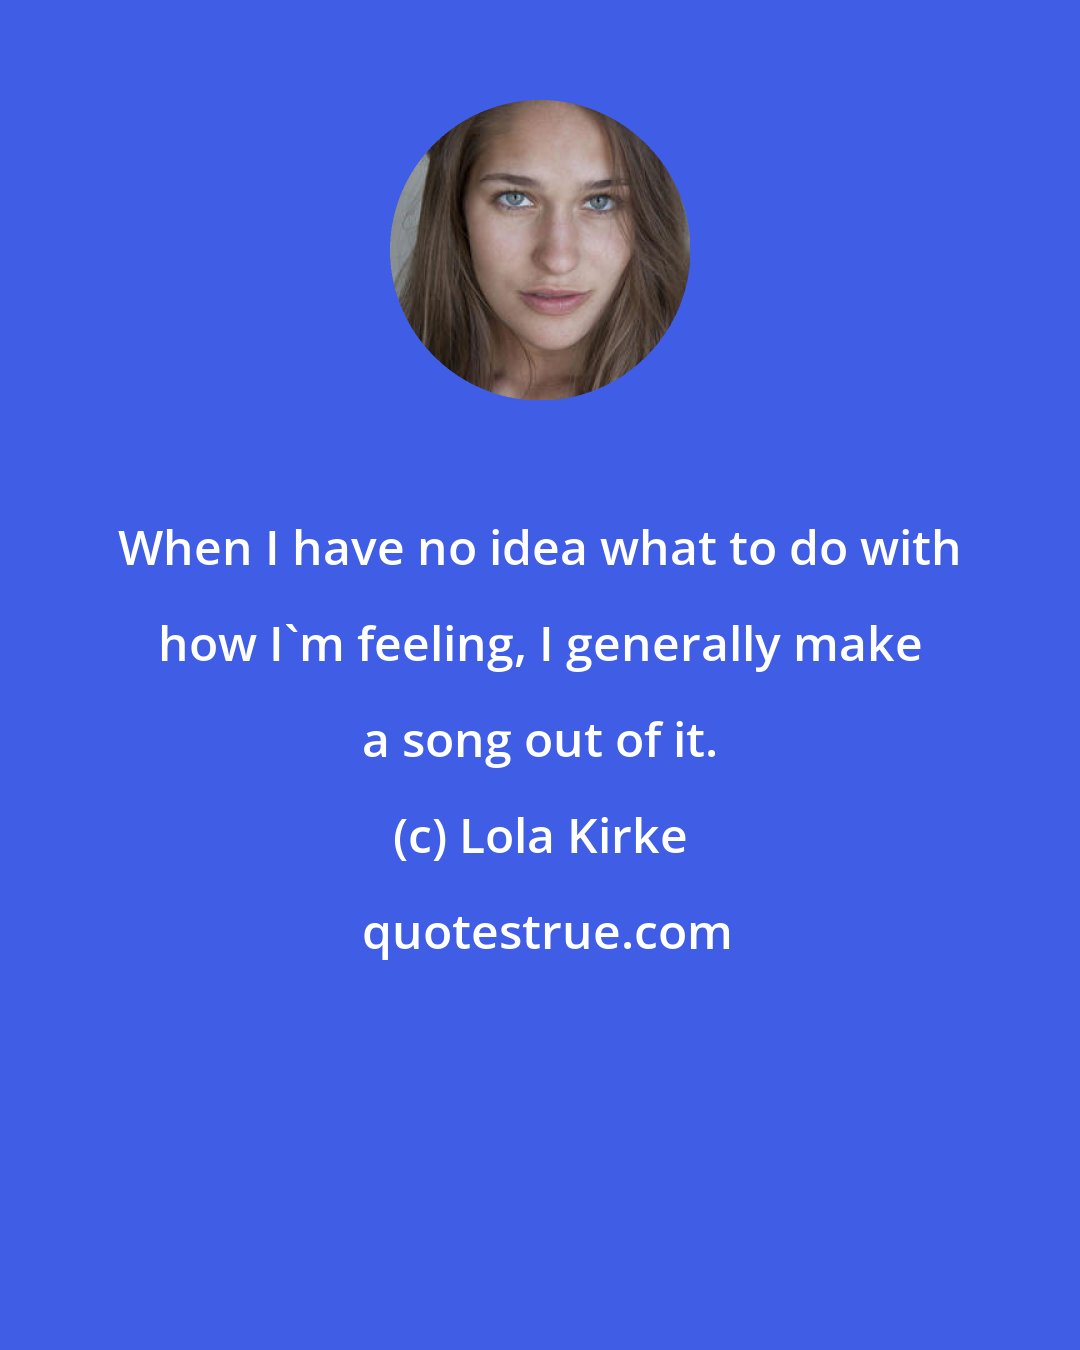 Lola Kirke: When I have no idea what to do with how I'm feeling, I generally make a song out of it.